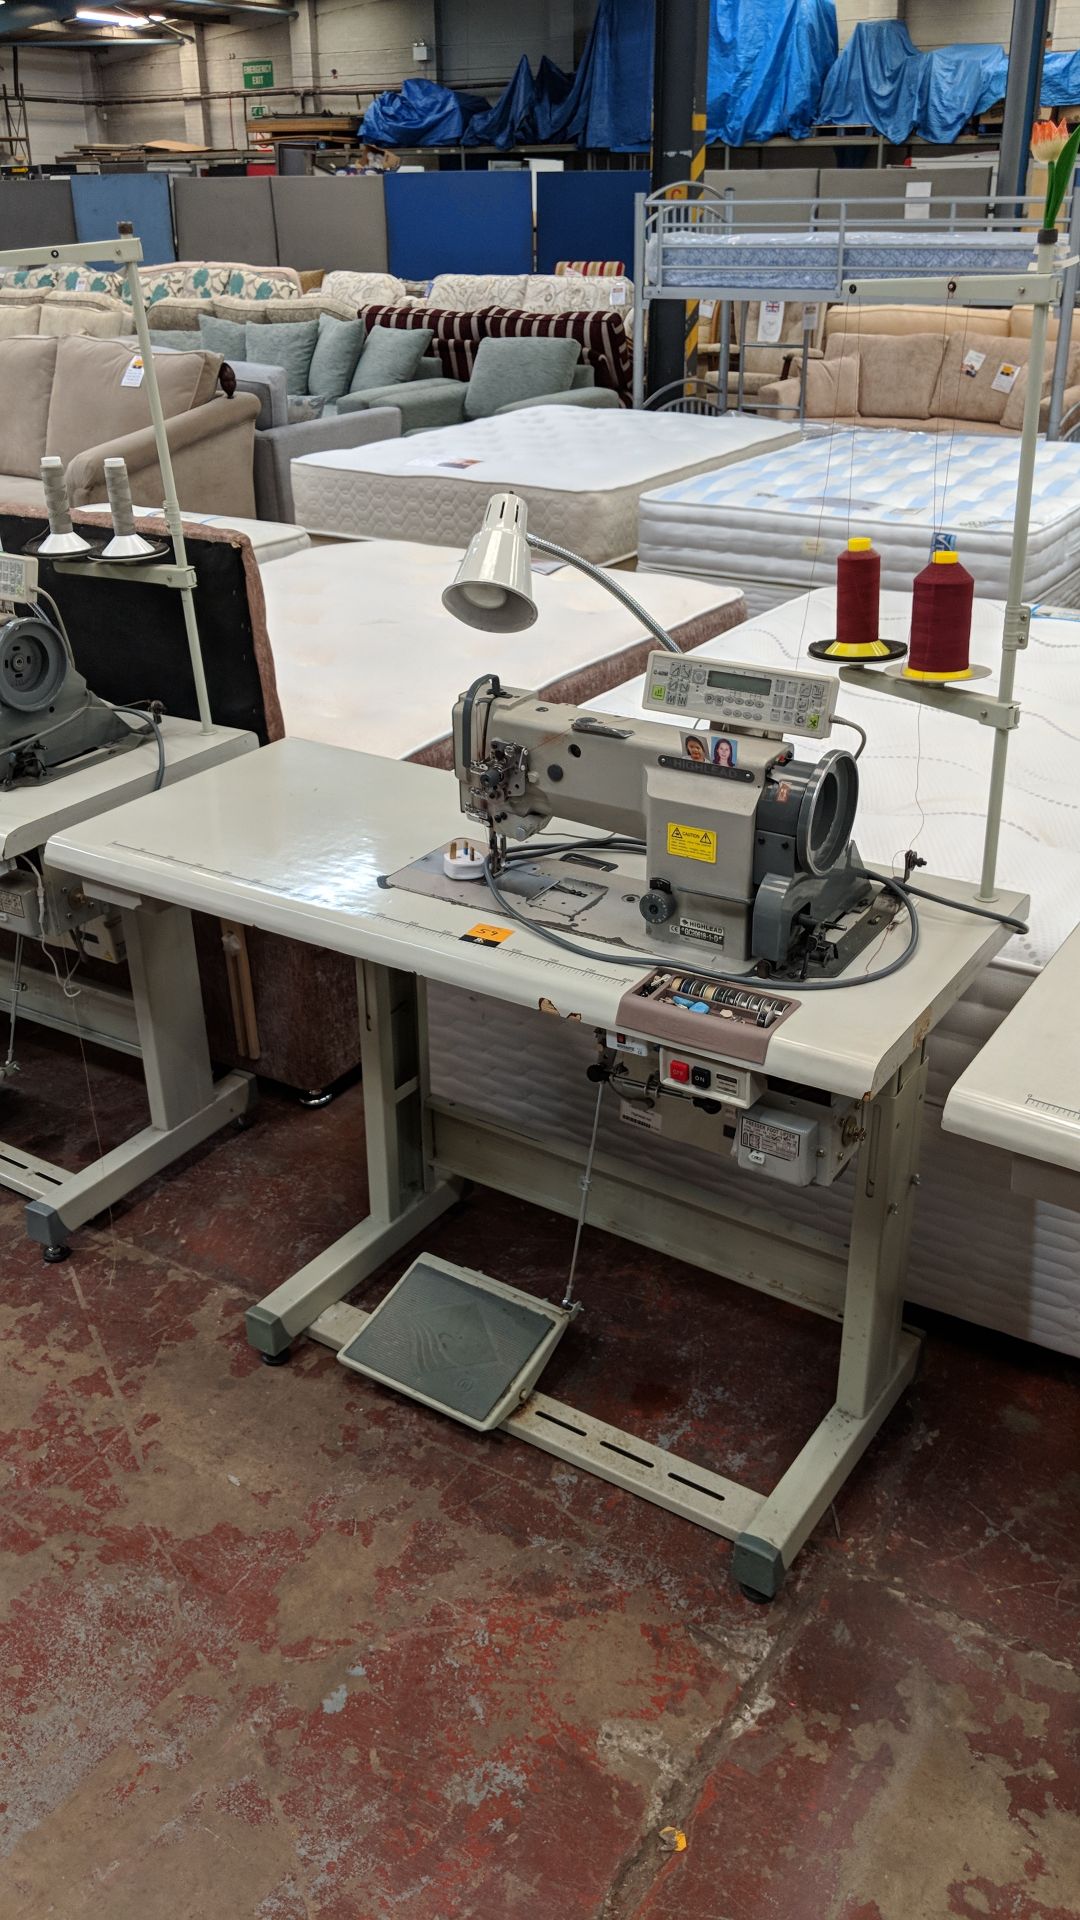 Highlead mode GC20618-1-D sewing machine including model C-60M digital read out/controller, on bench - Image 5 of 5